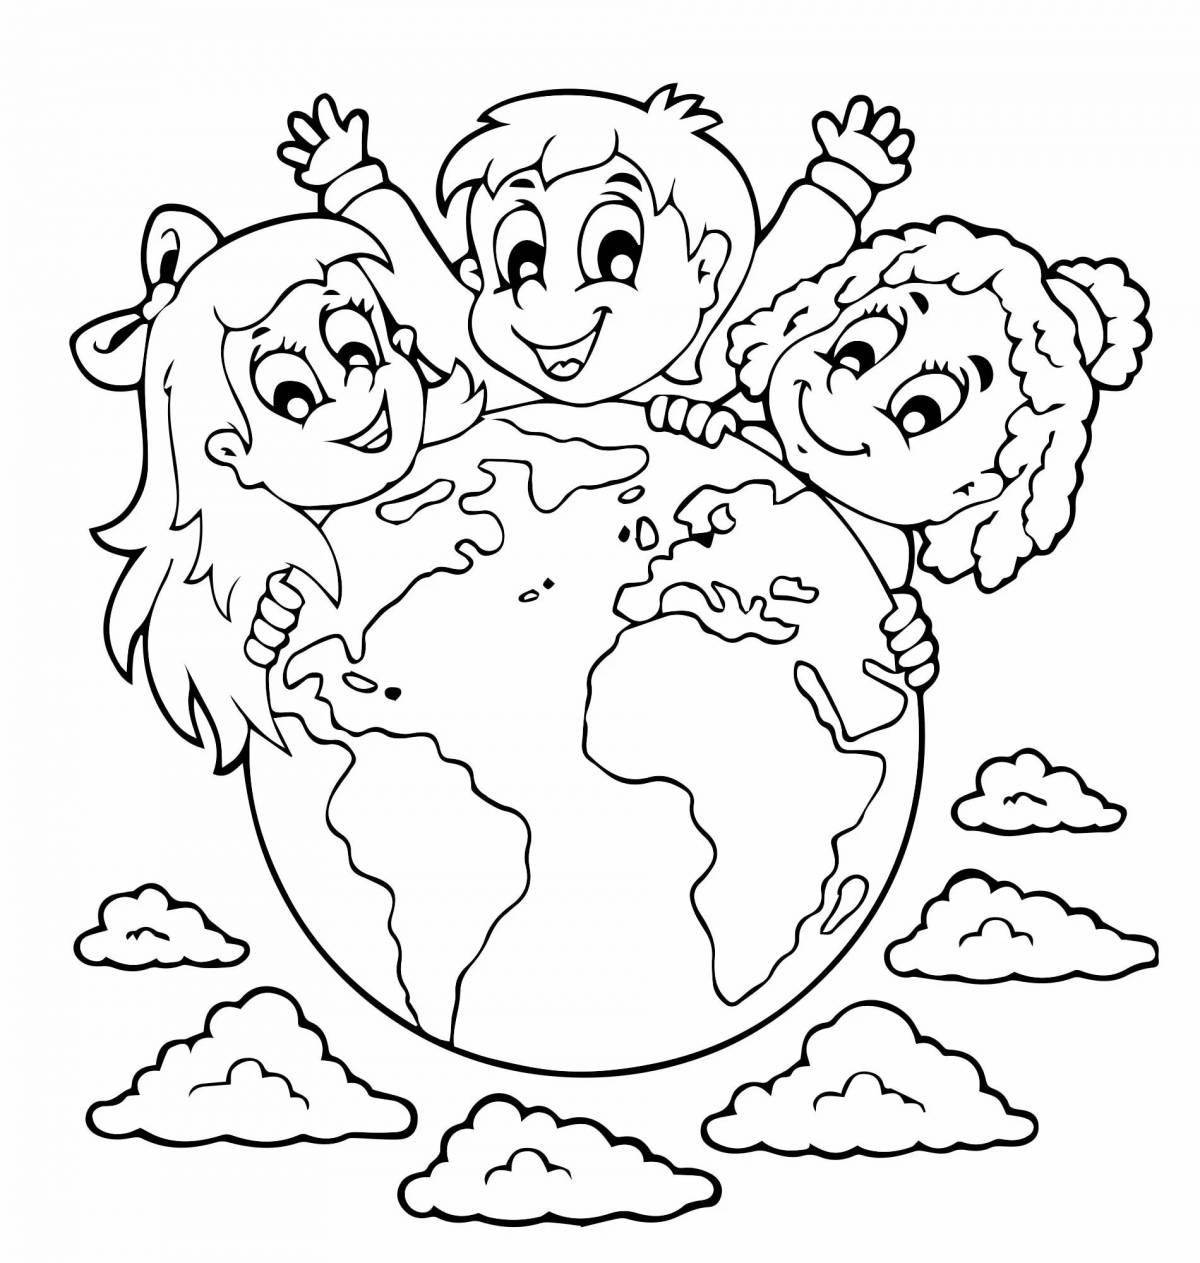 Creative world on earth coloring book